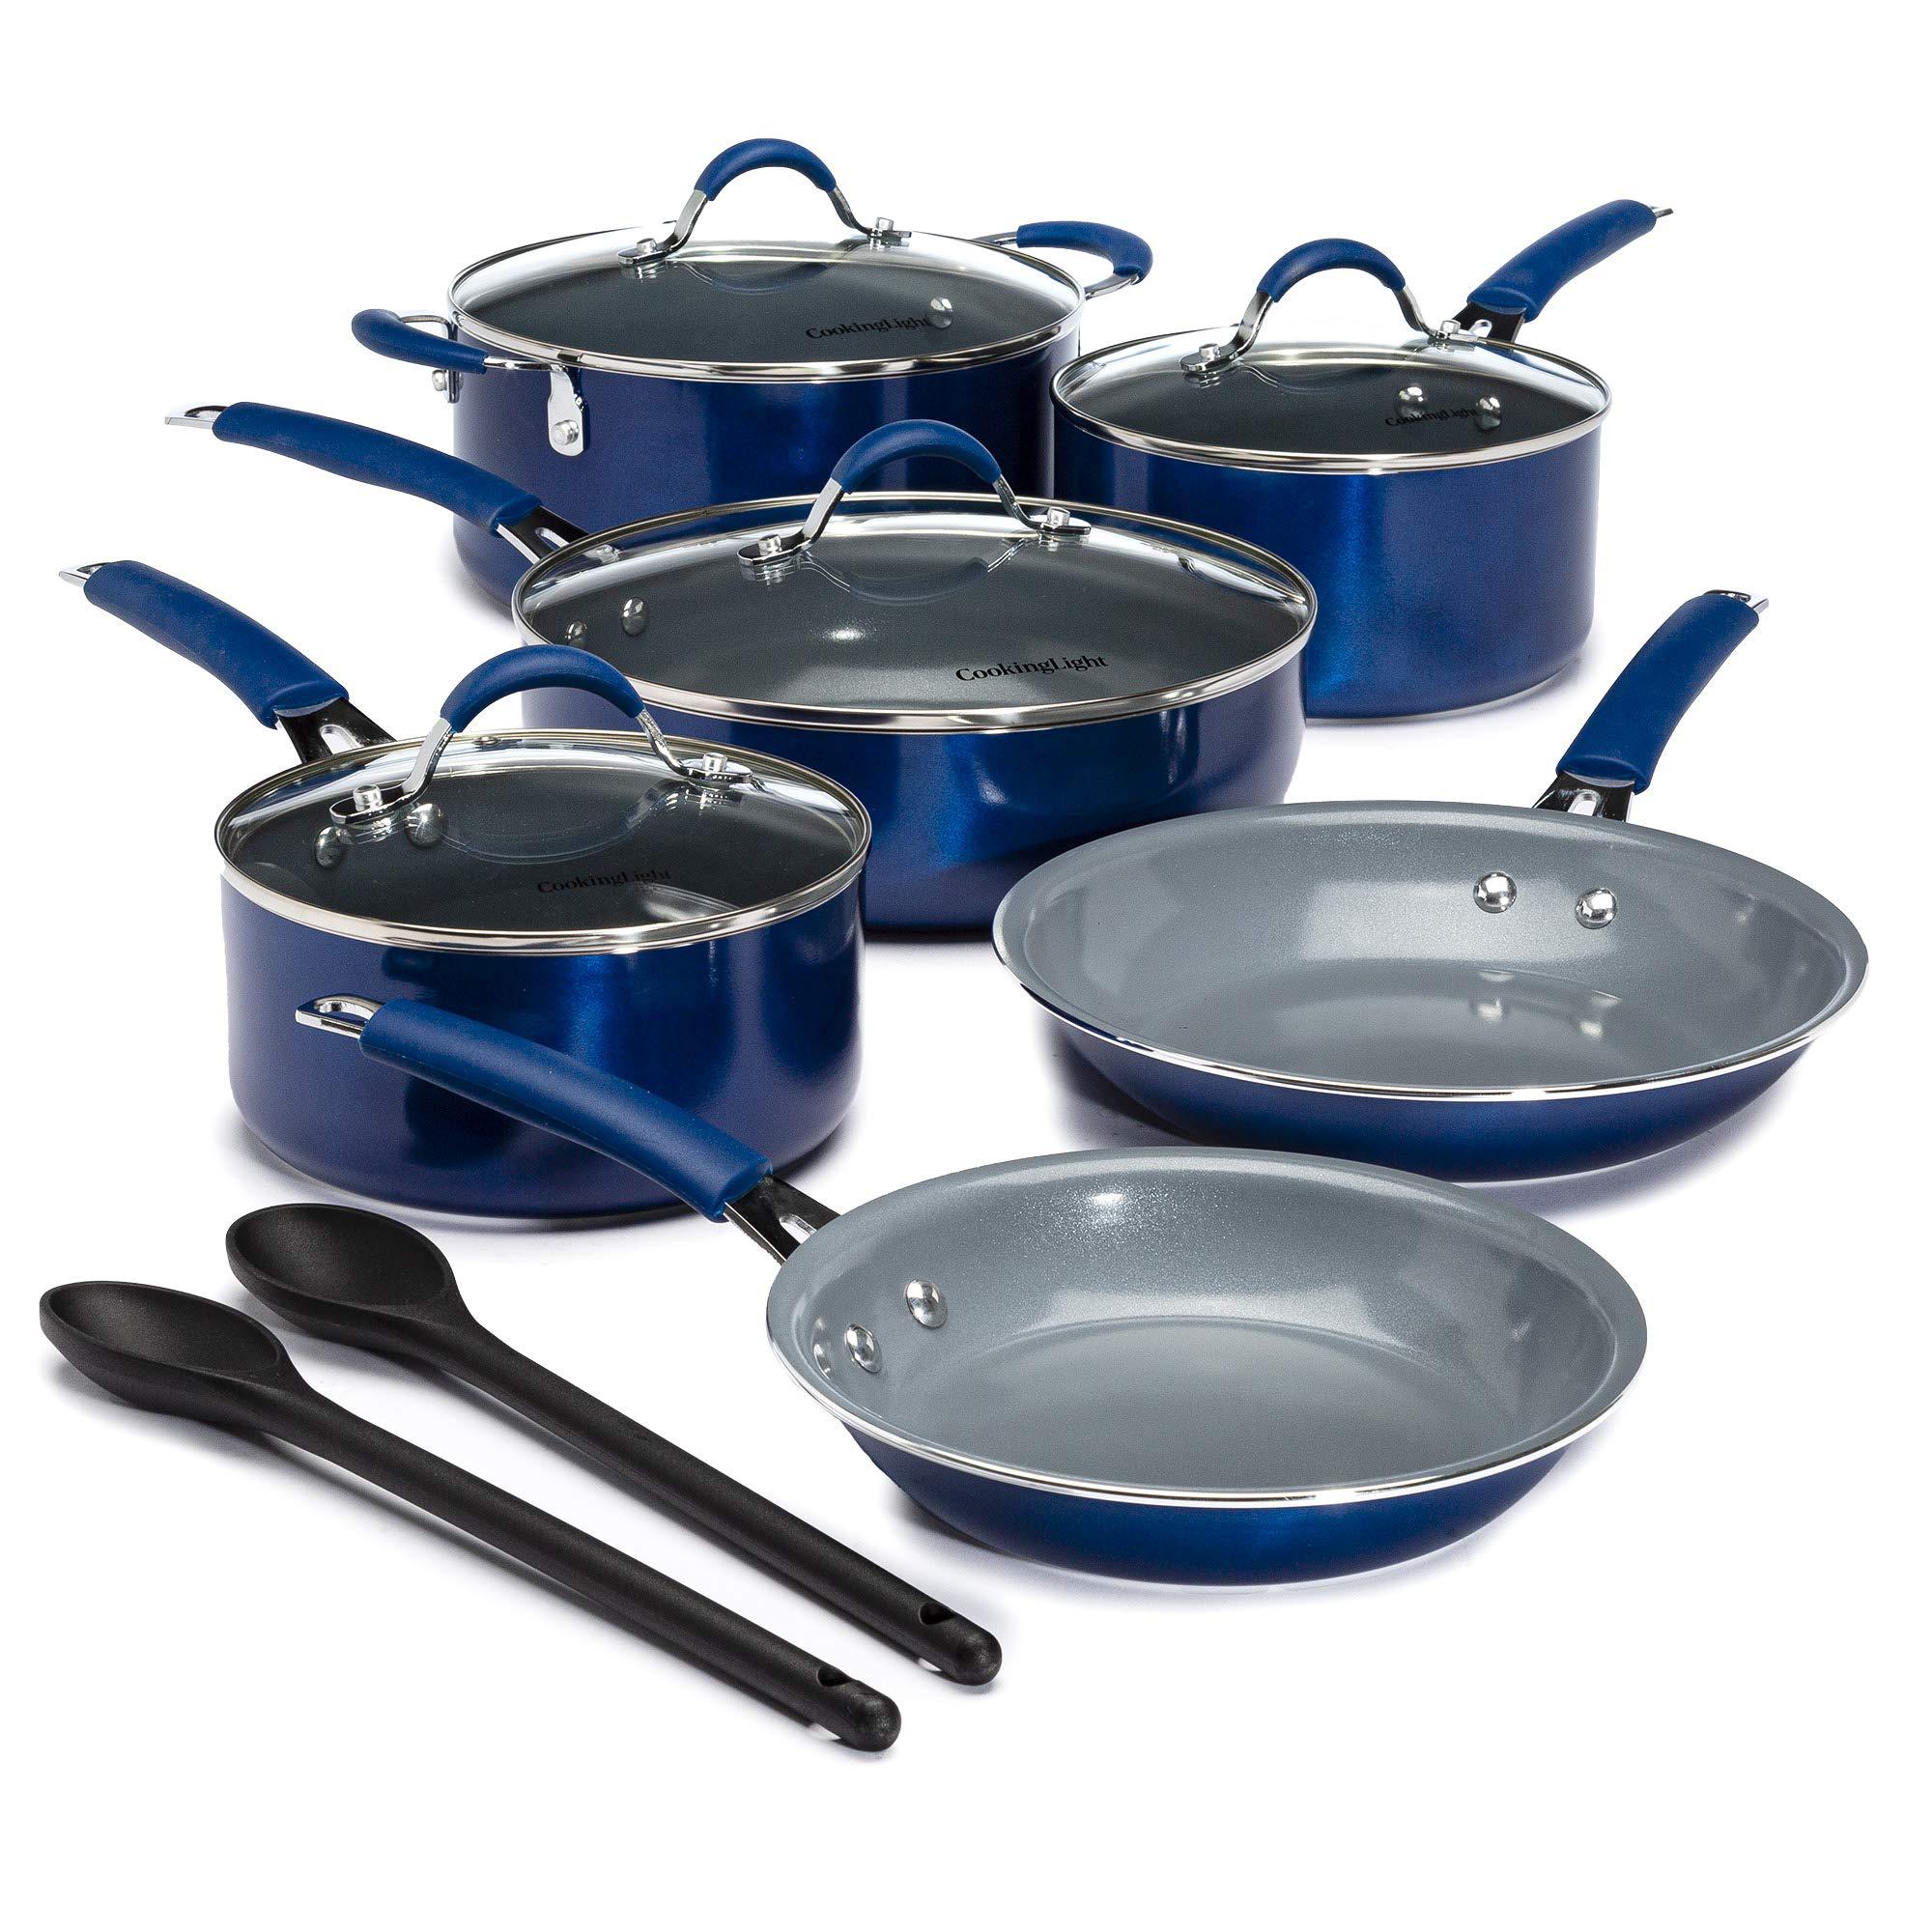 cooking light nonstick ceramic pots and pans set with silicone stay cool handles, dishwasher safe, 12-piece cookware set, blu